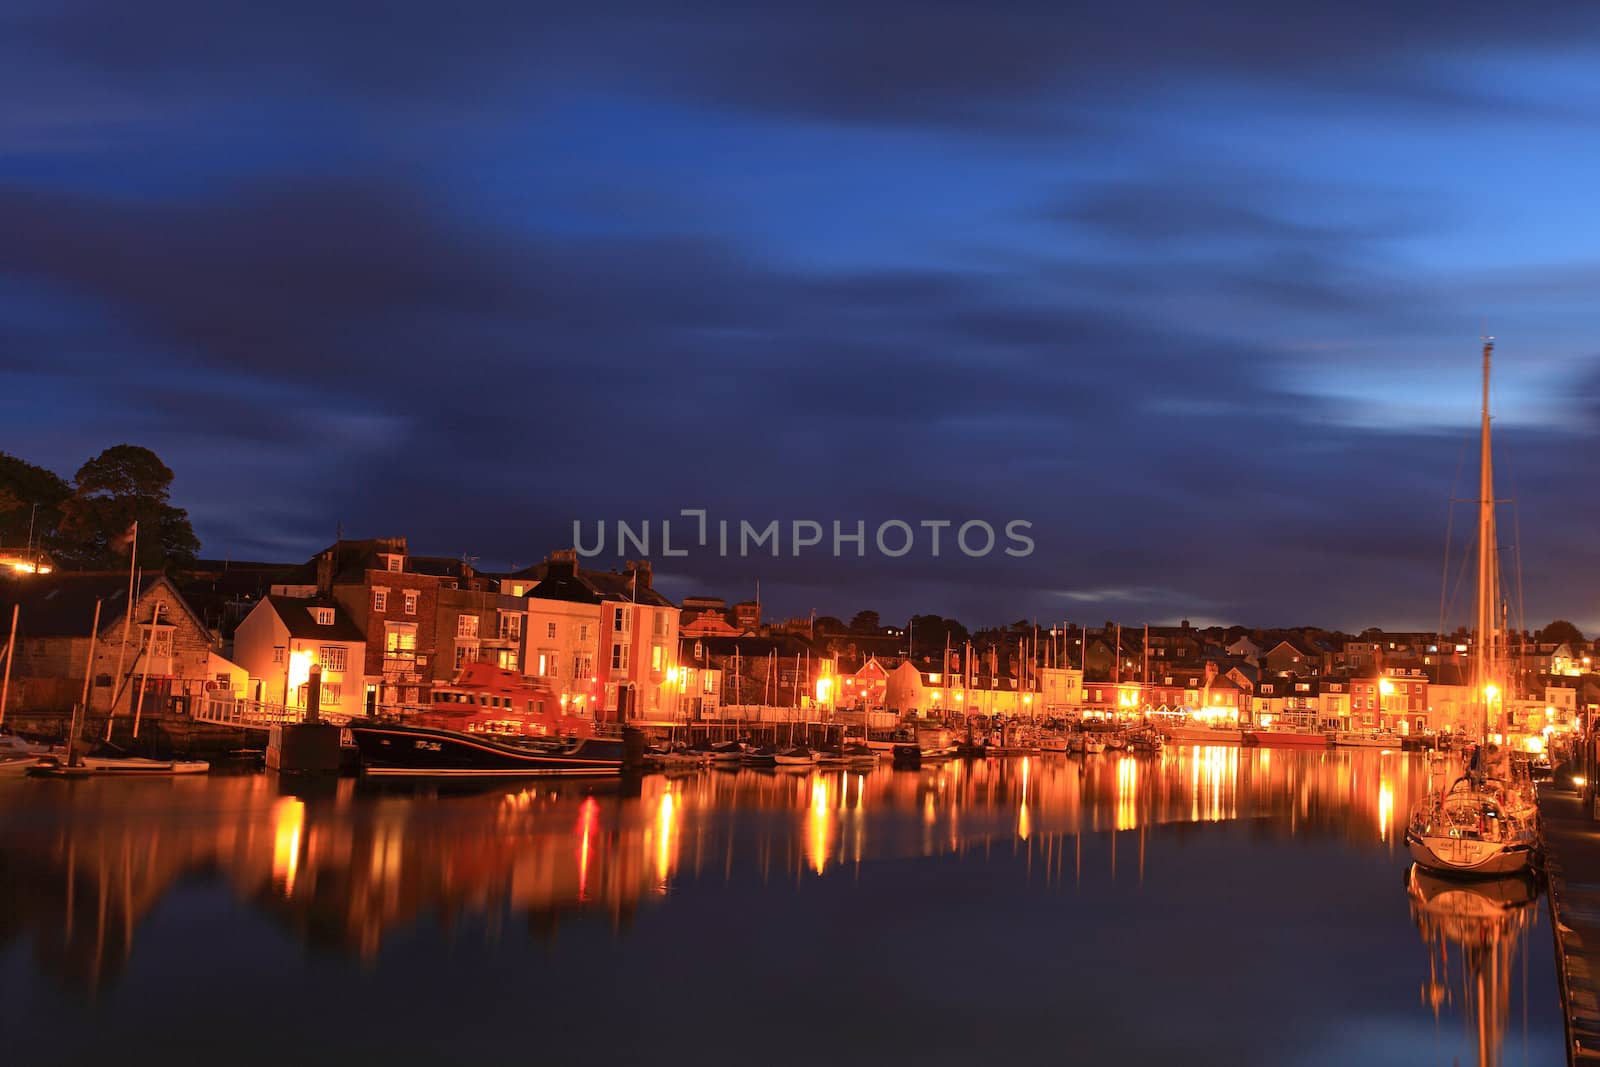 Town Lights Light up Weymouth Quay as Night Sets in in Dorset